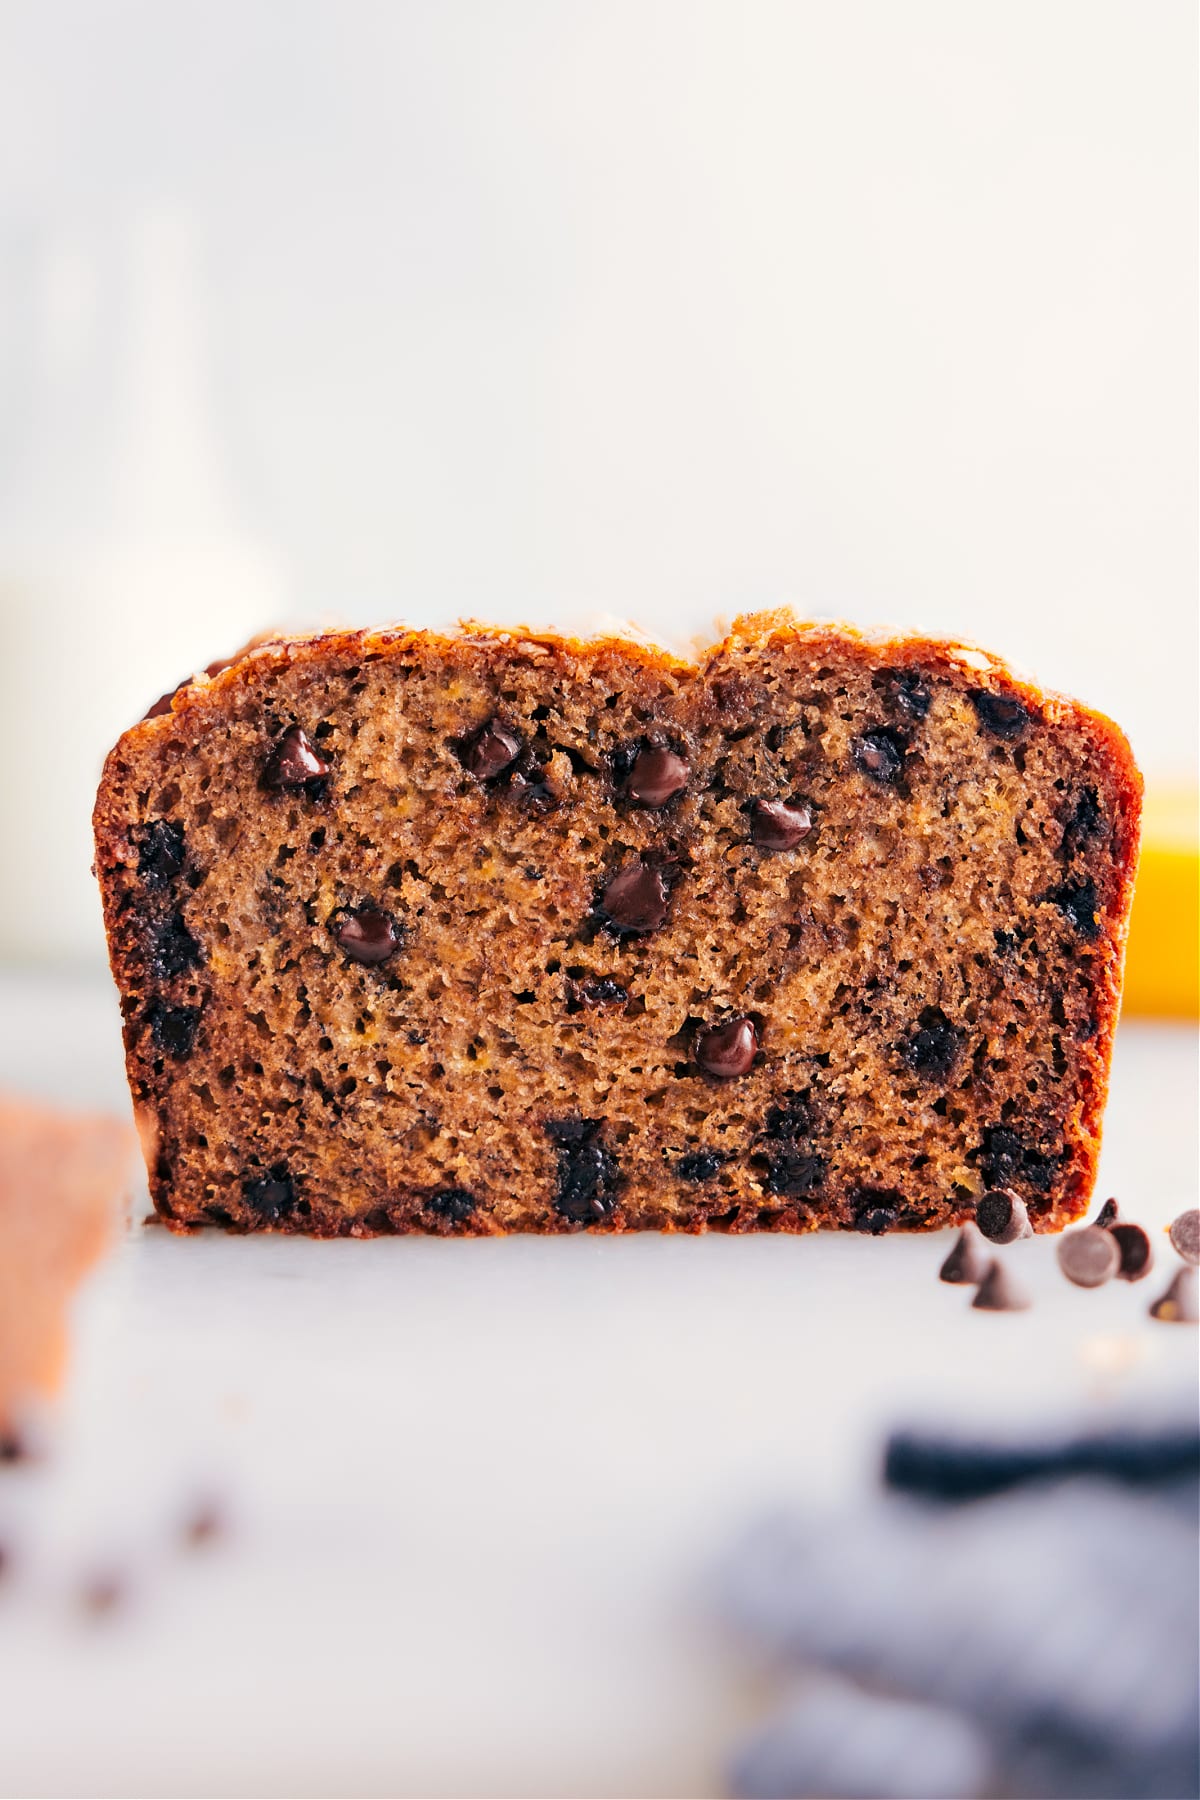 A perfectly baked loaf, cut open to reveal the fluffy and delicious interior with chocolate chips.